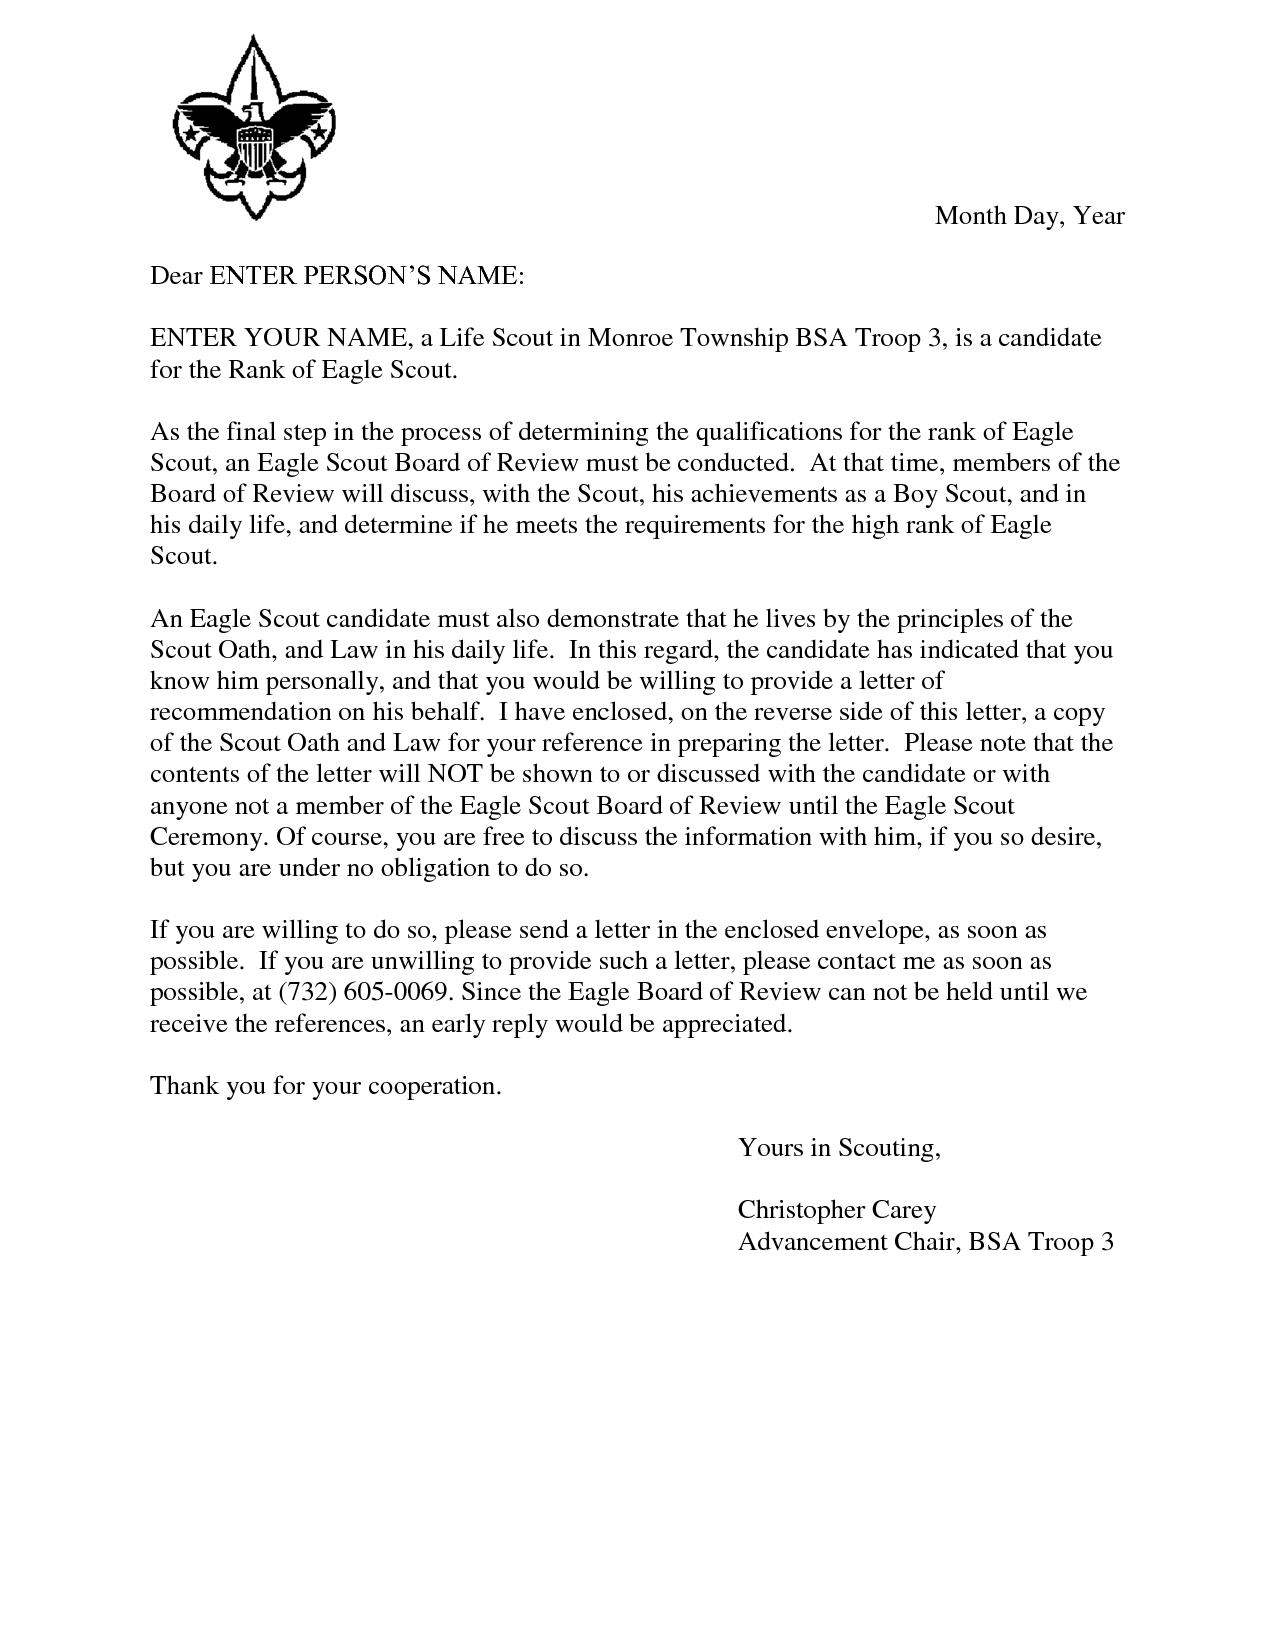 Writing A Letter Of Recommendation Template - Eagle Scout Reference Request Sample Letter Doc 7 by Hfr990q